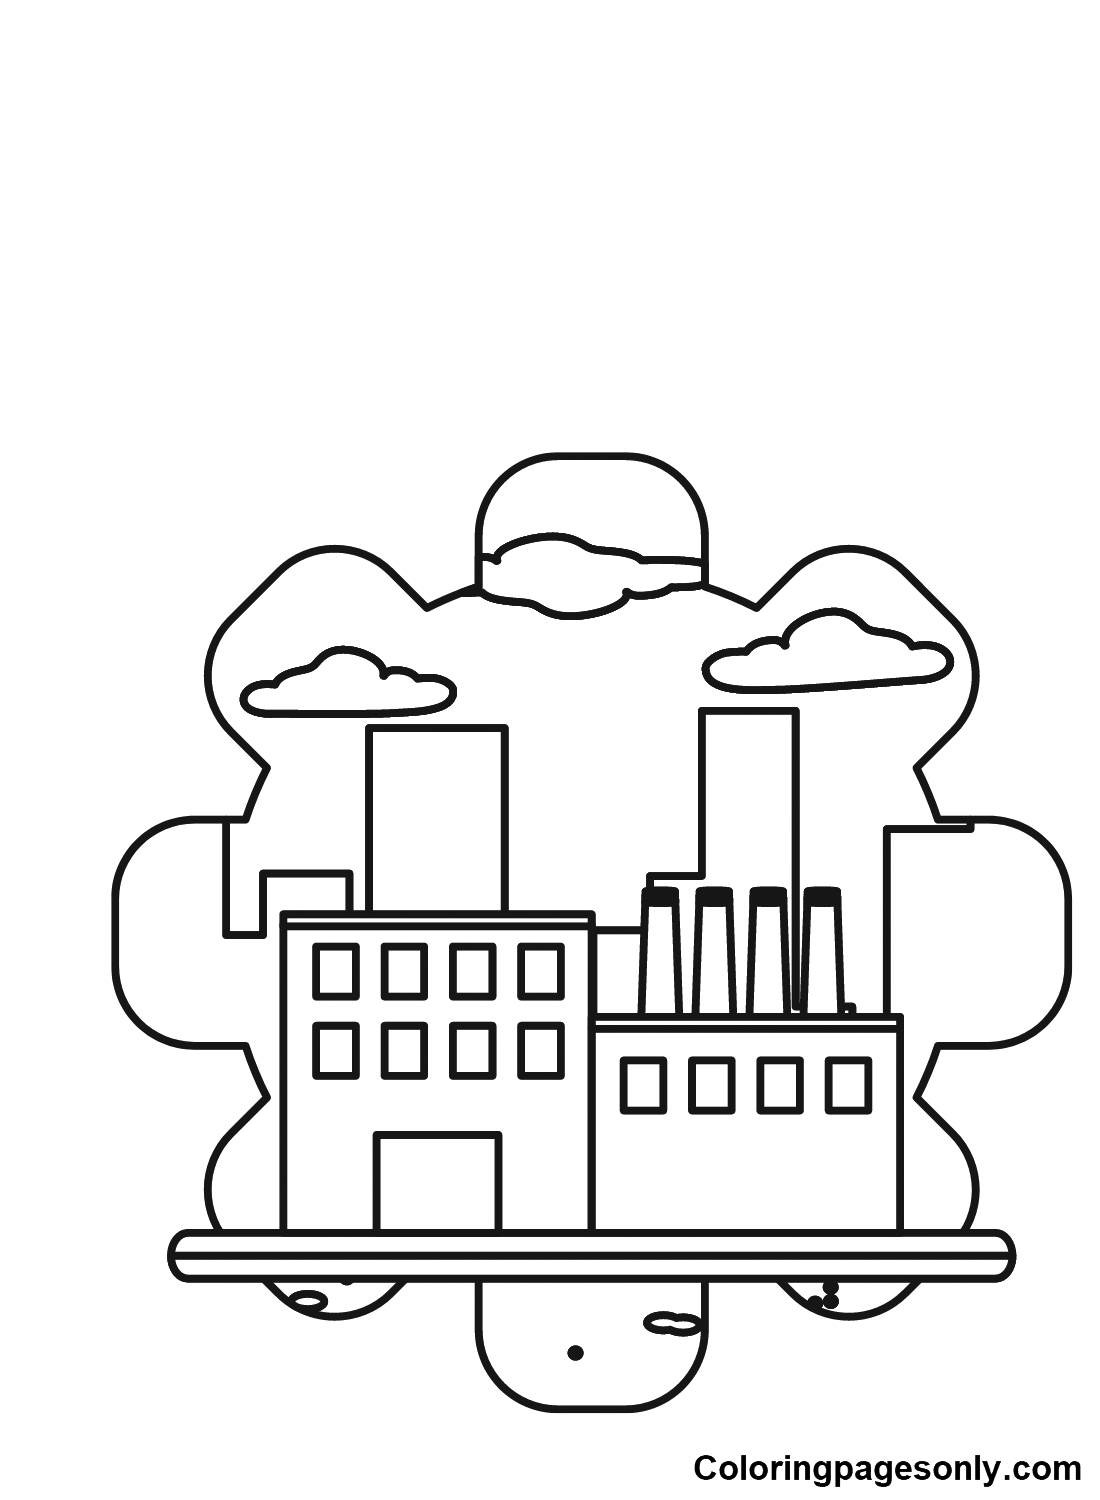 Free Factory Coloring Pages